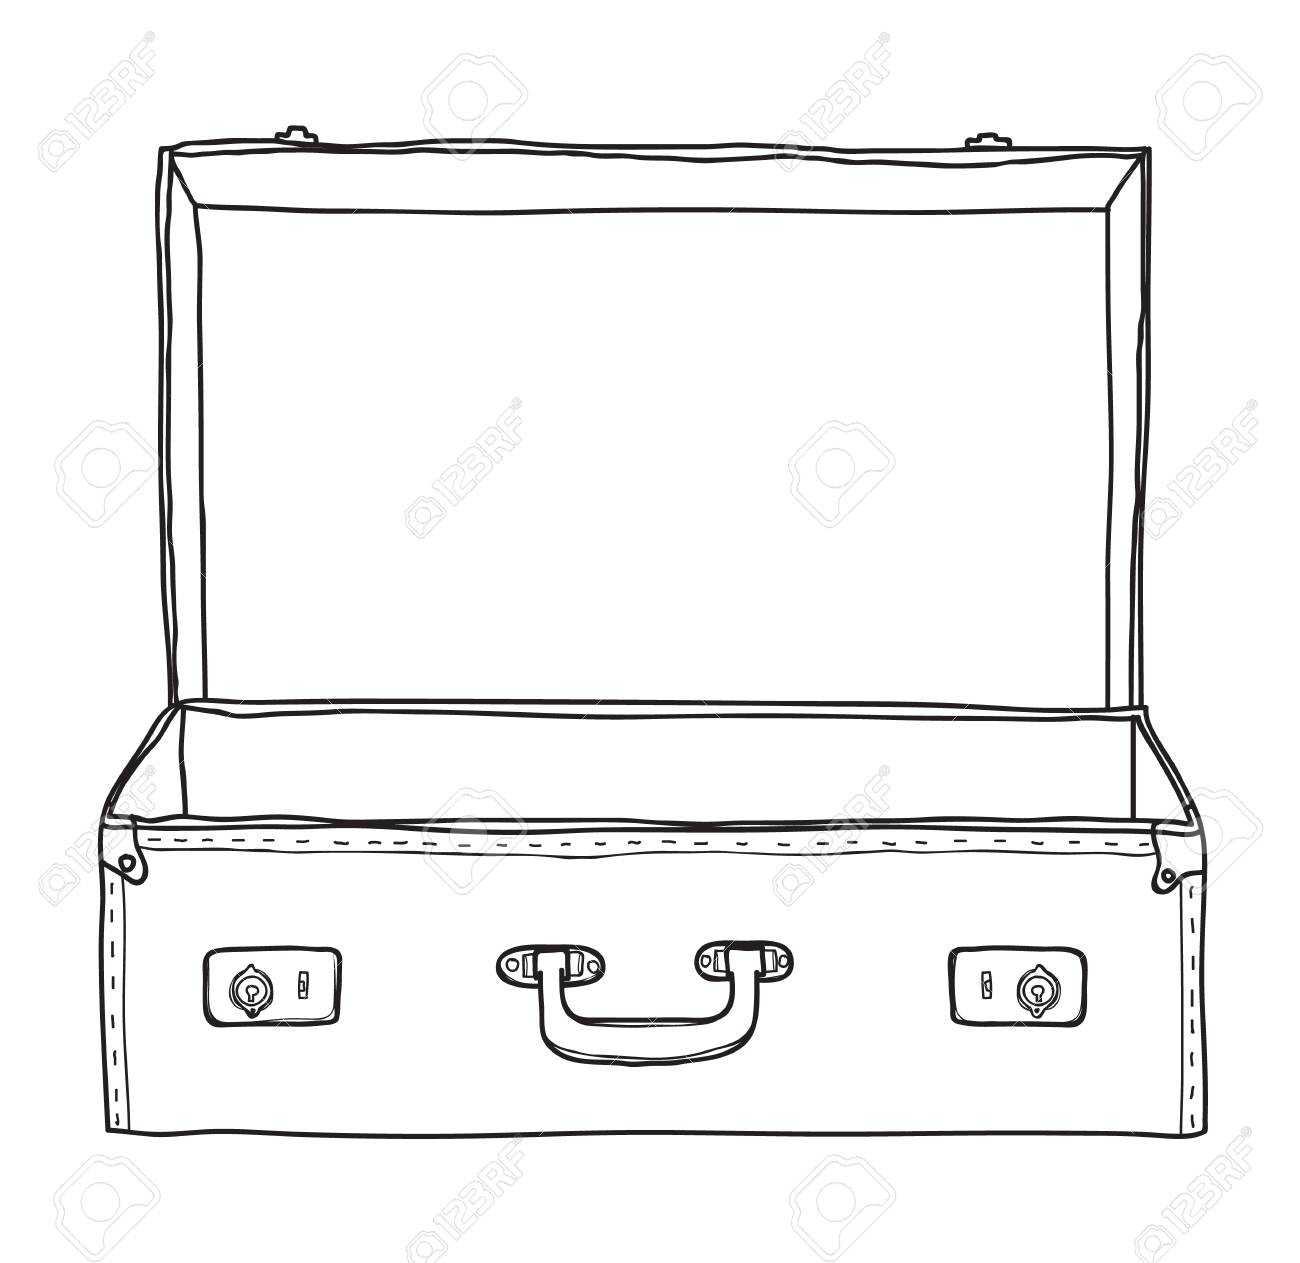 Suitcase Vintage Empty Suitcase Hand Drawn Vector Line Art Illustration With Blank Suitcase Template